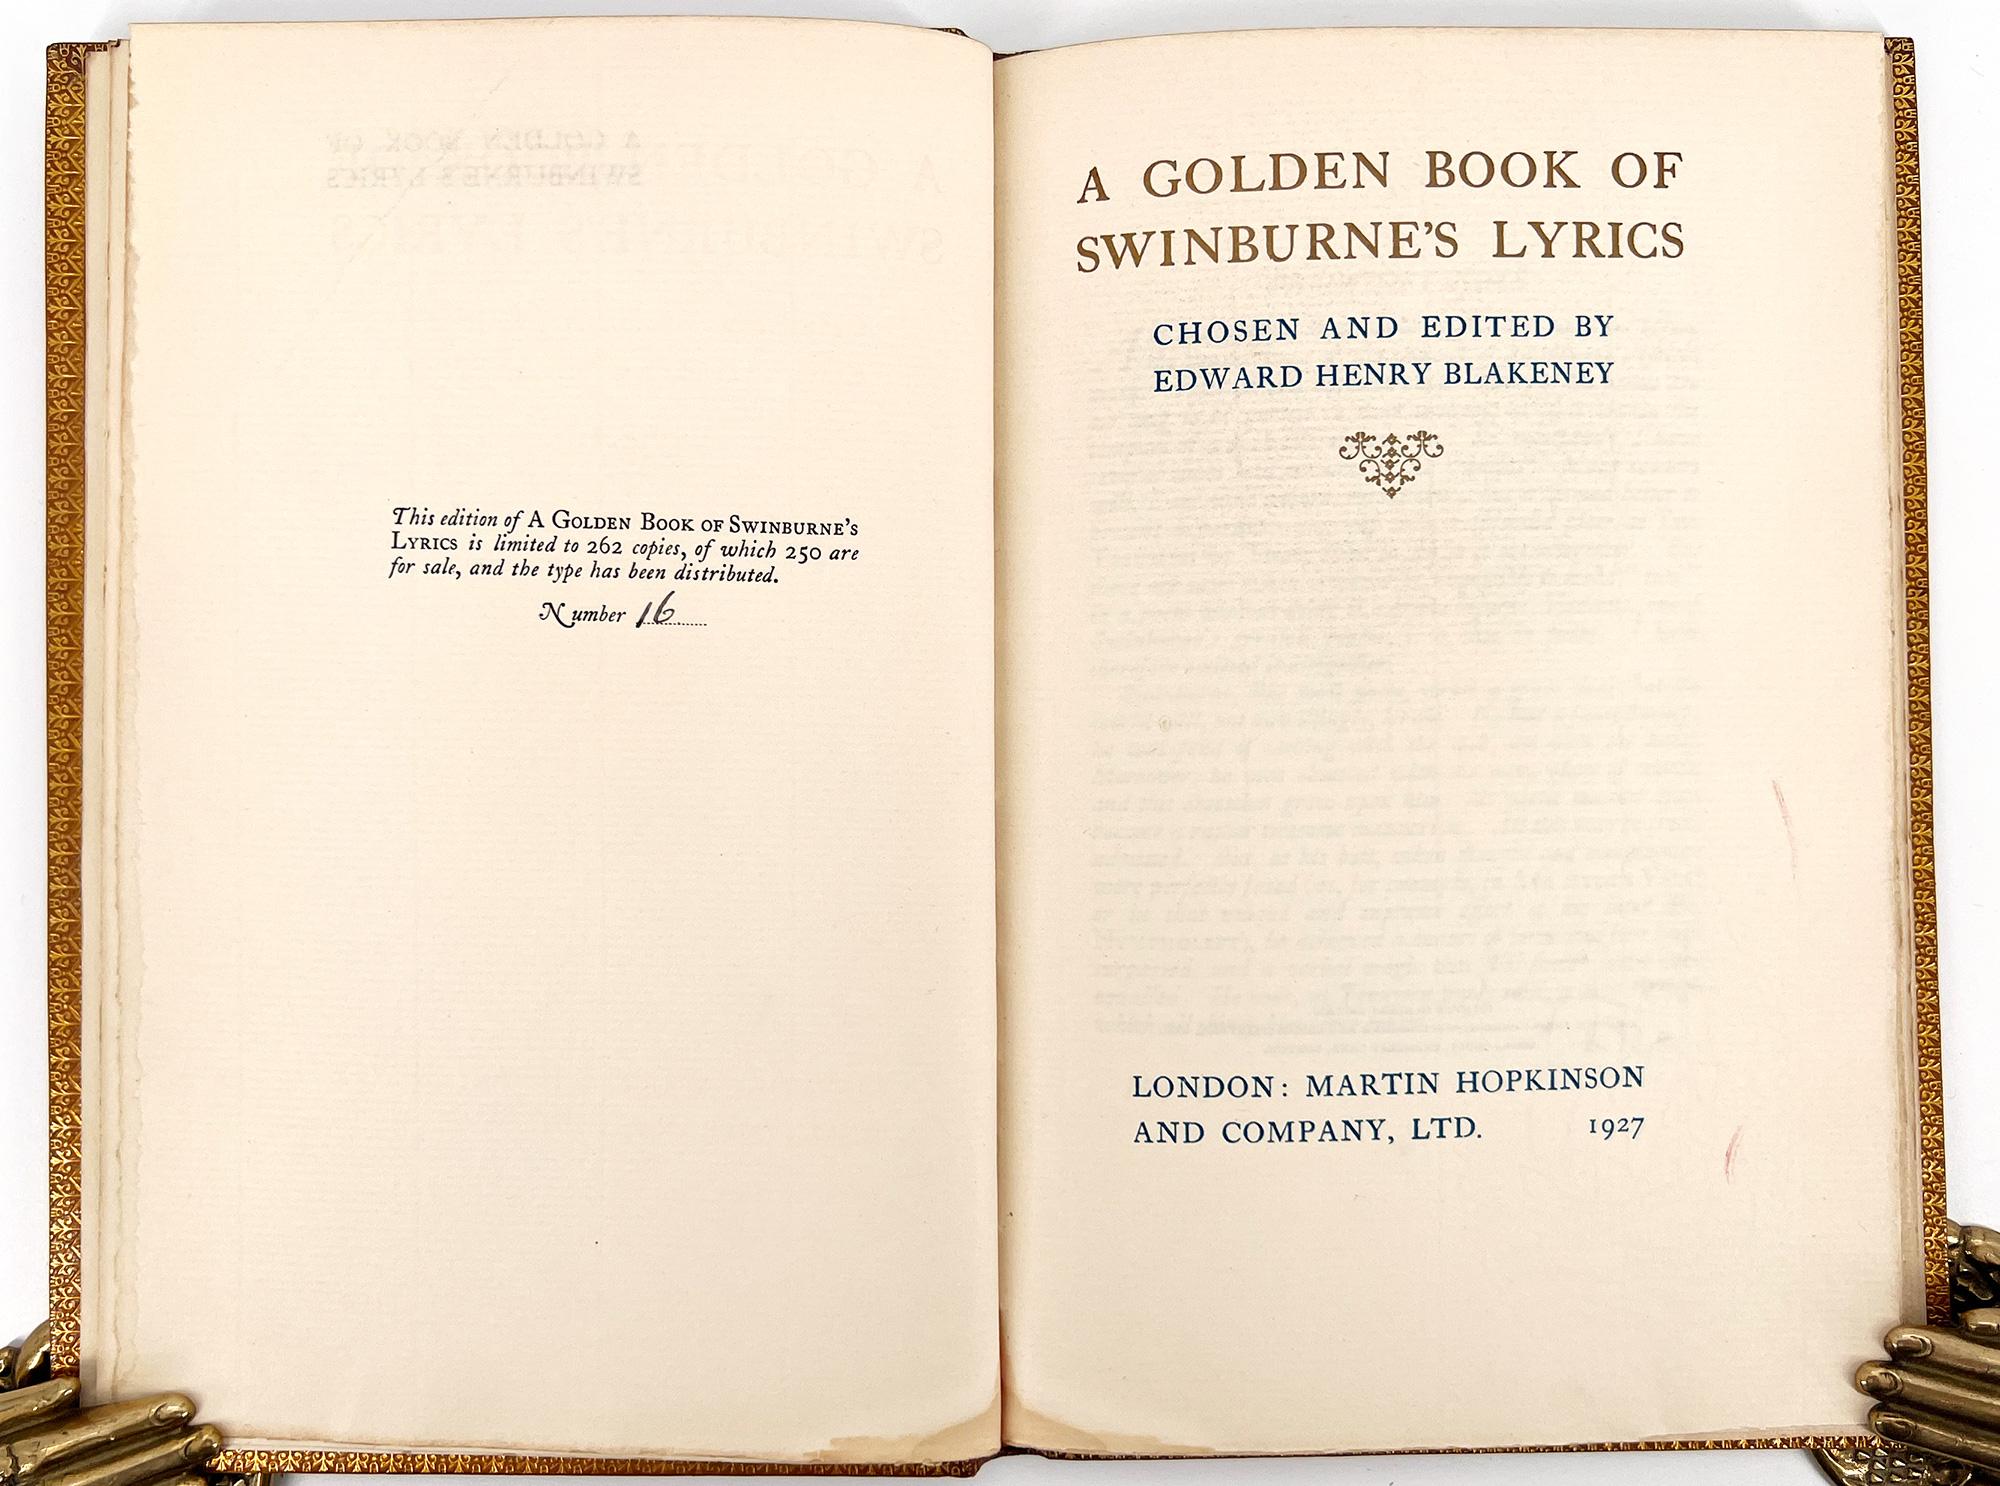 A beautiful Zaehnsdorf-bound collection of the poetry of Algernon Charles Swinburne (1837 – 1909) whose works often handled Victorian taboos, such as lesbianism, sado-masochism, and anti-theism. His poems have many common motifs, such as the ocean,